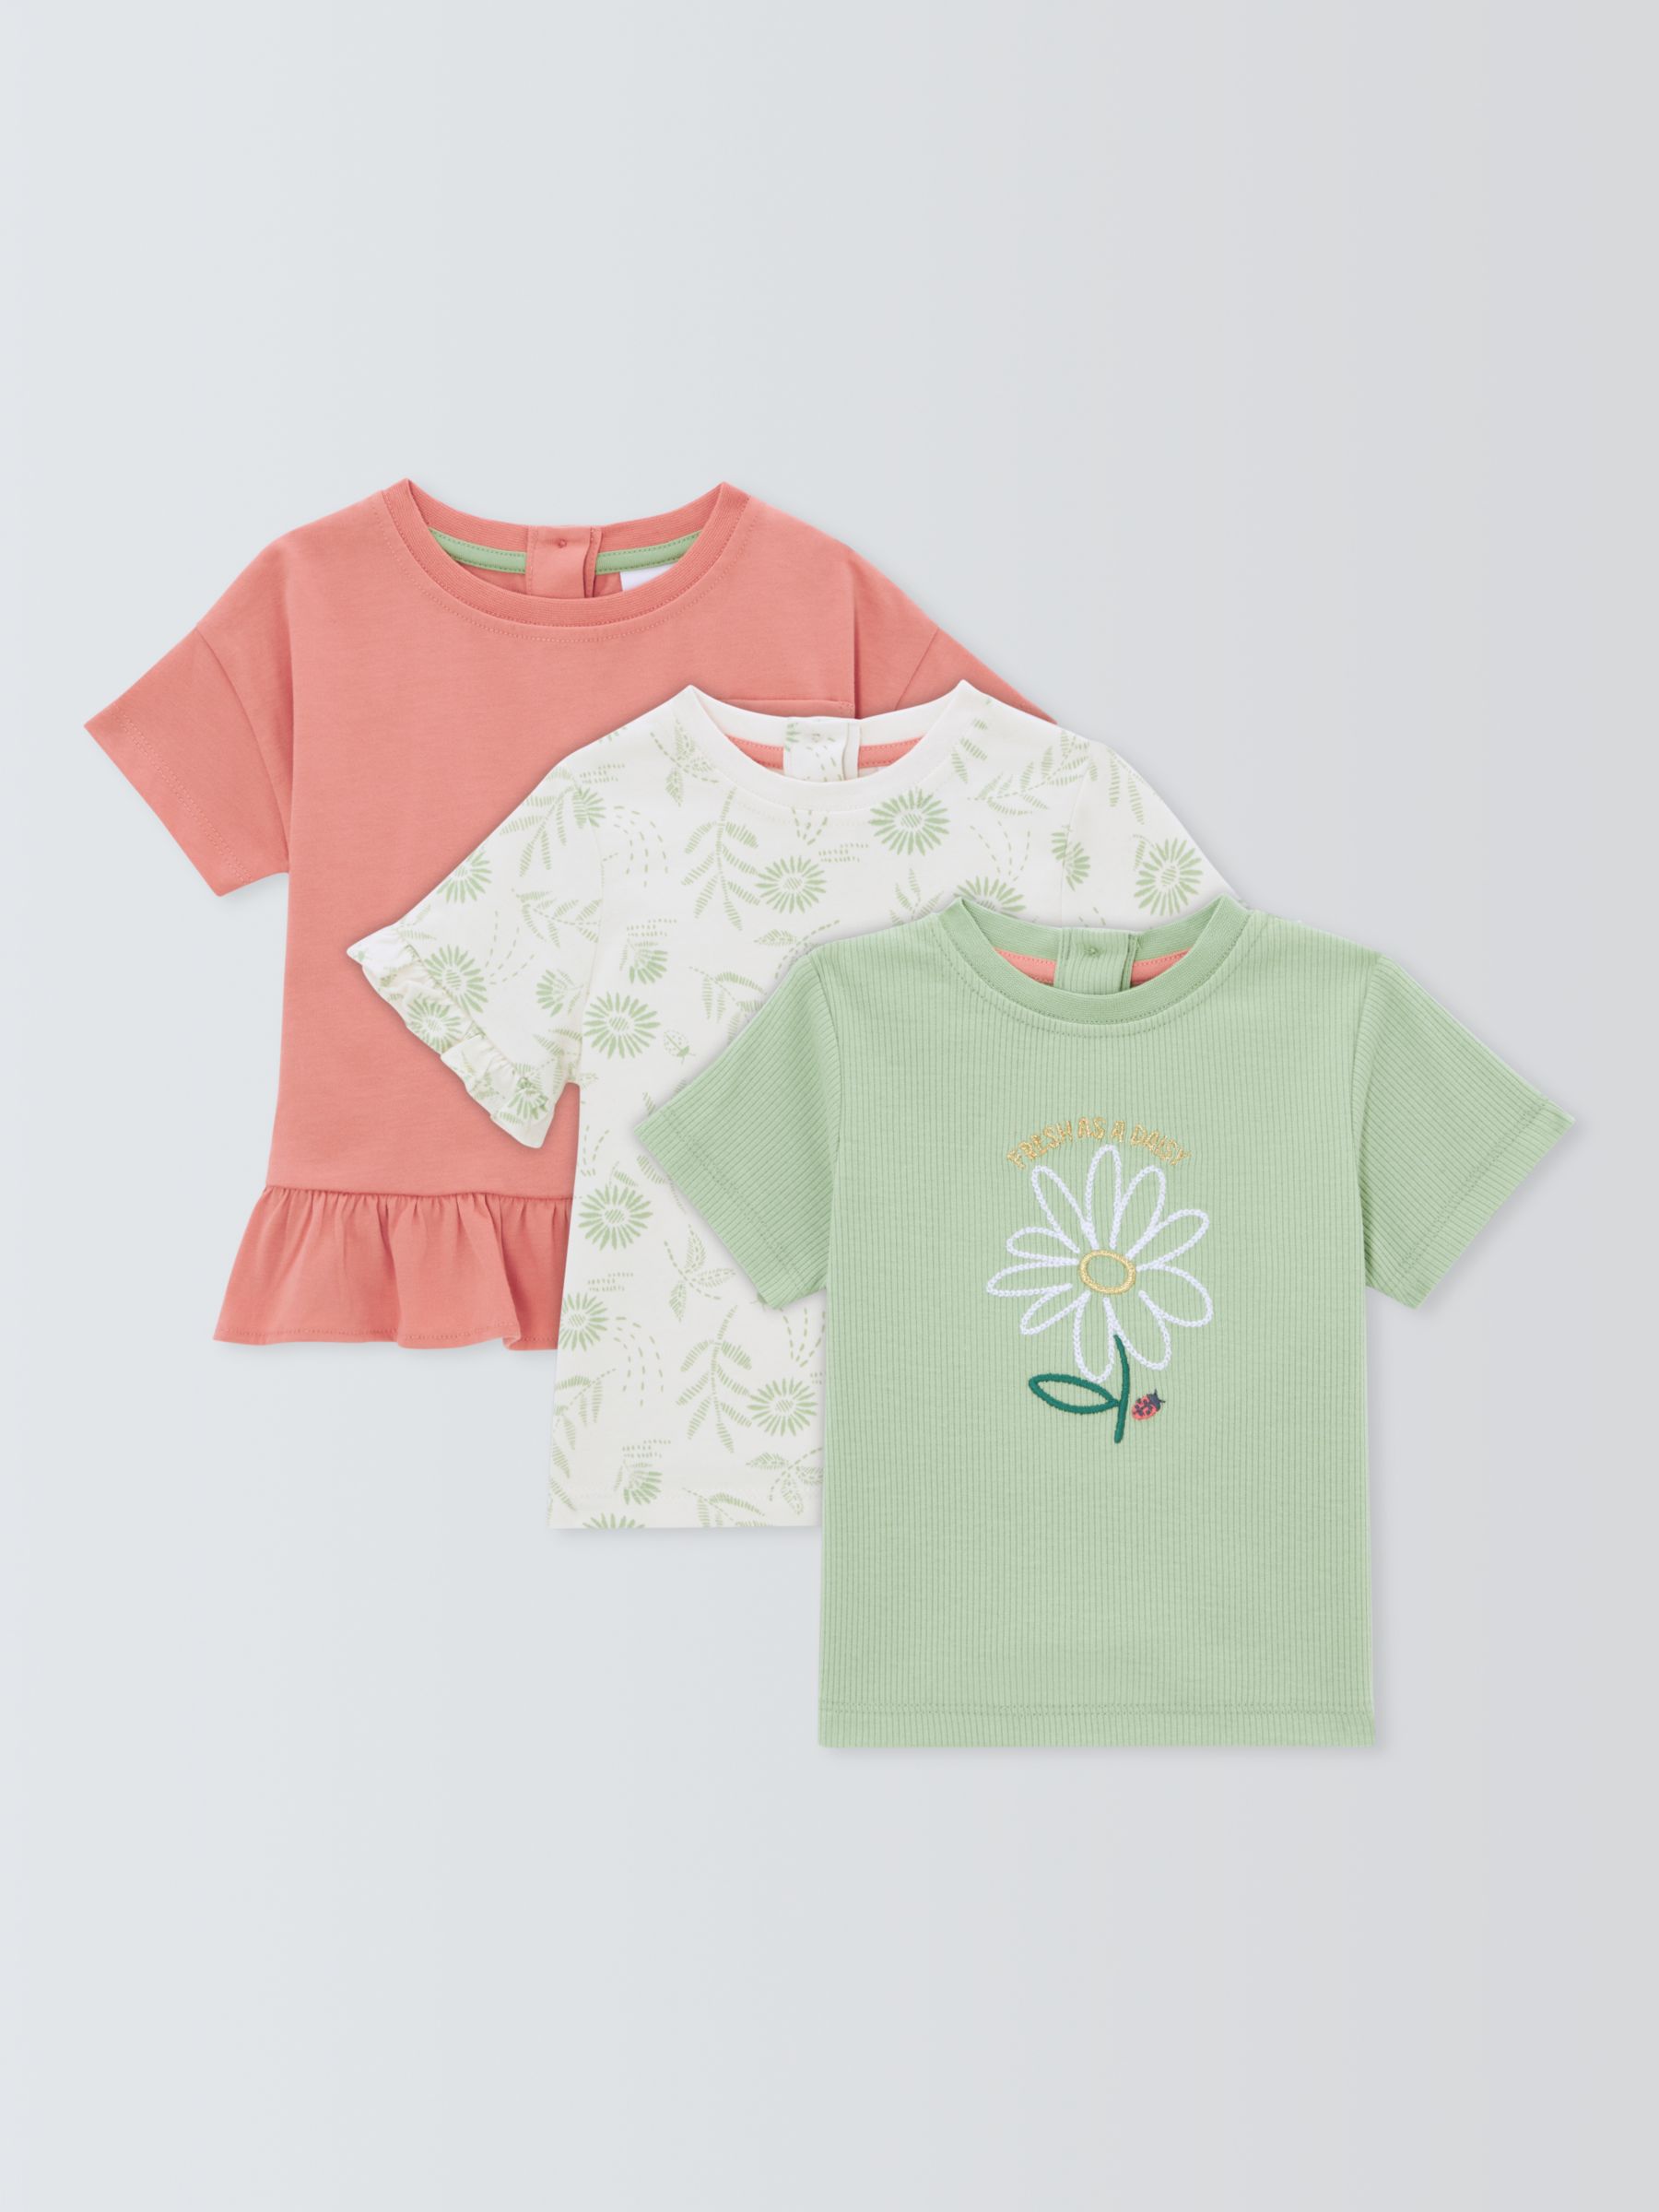 John Lewis Baby Floral Mix Top, Pack of 3, Multi, 6-9 months